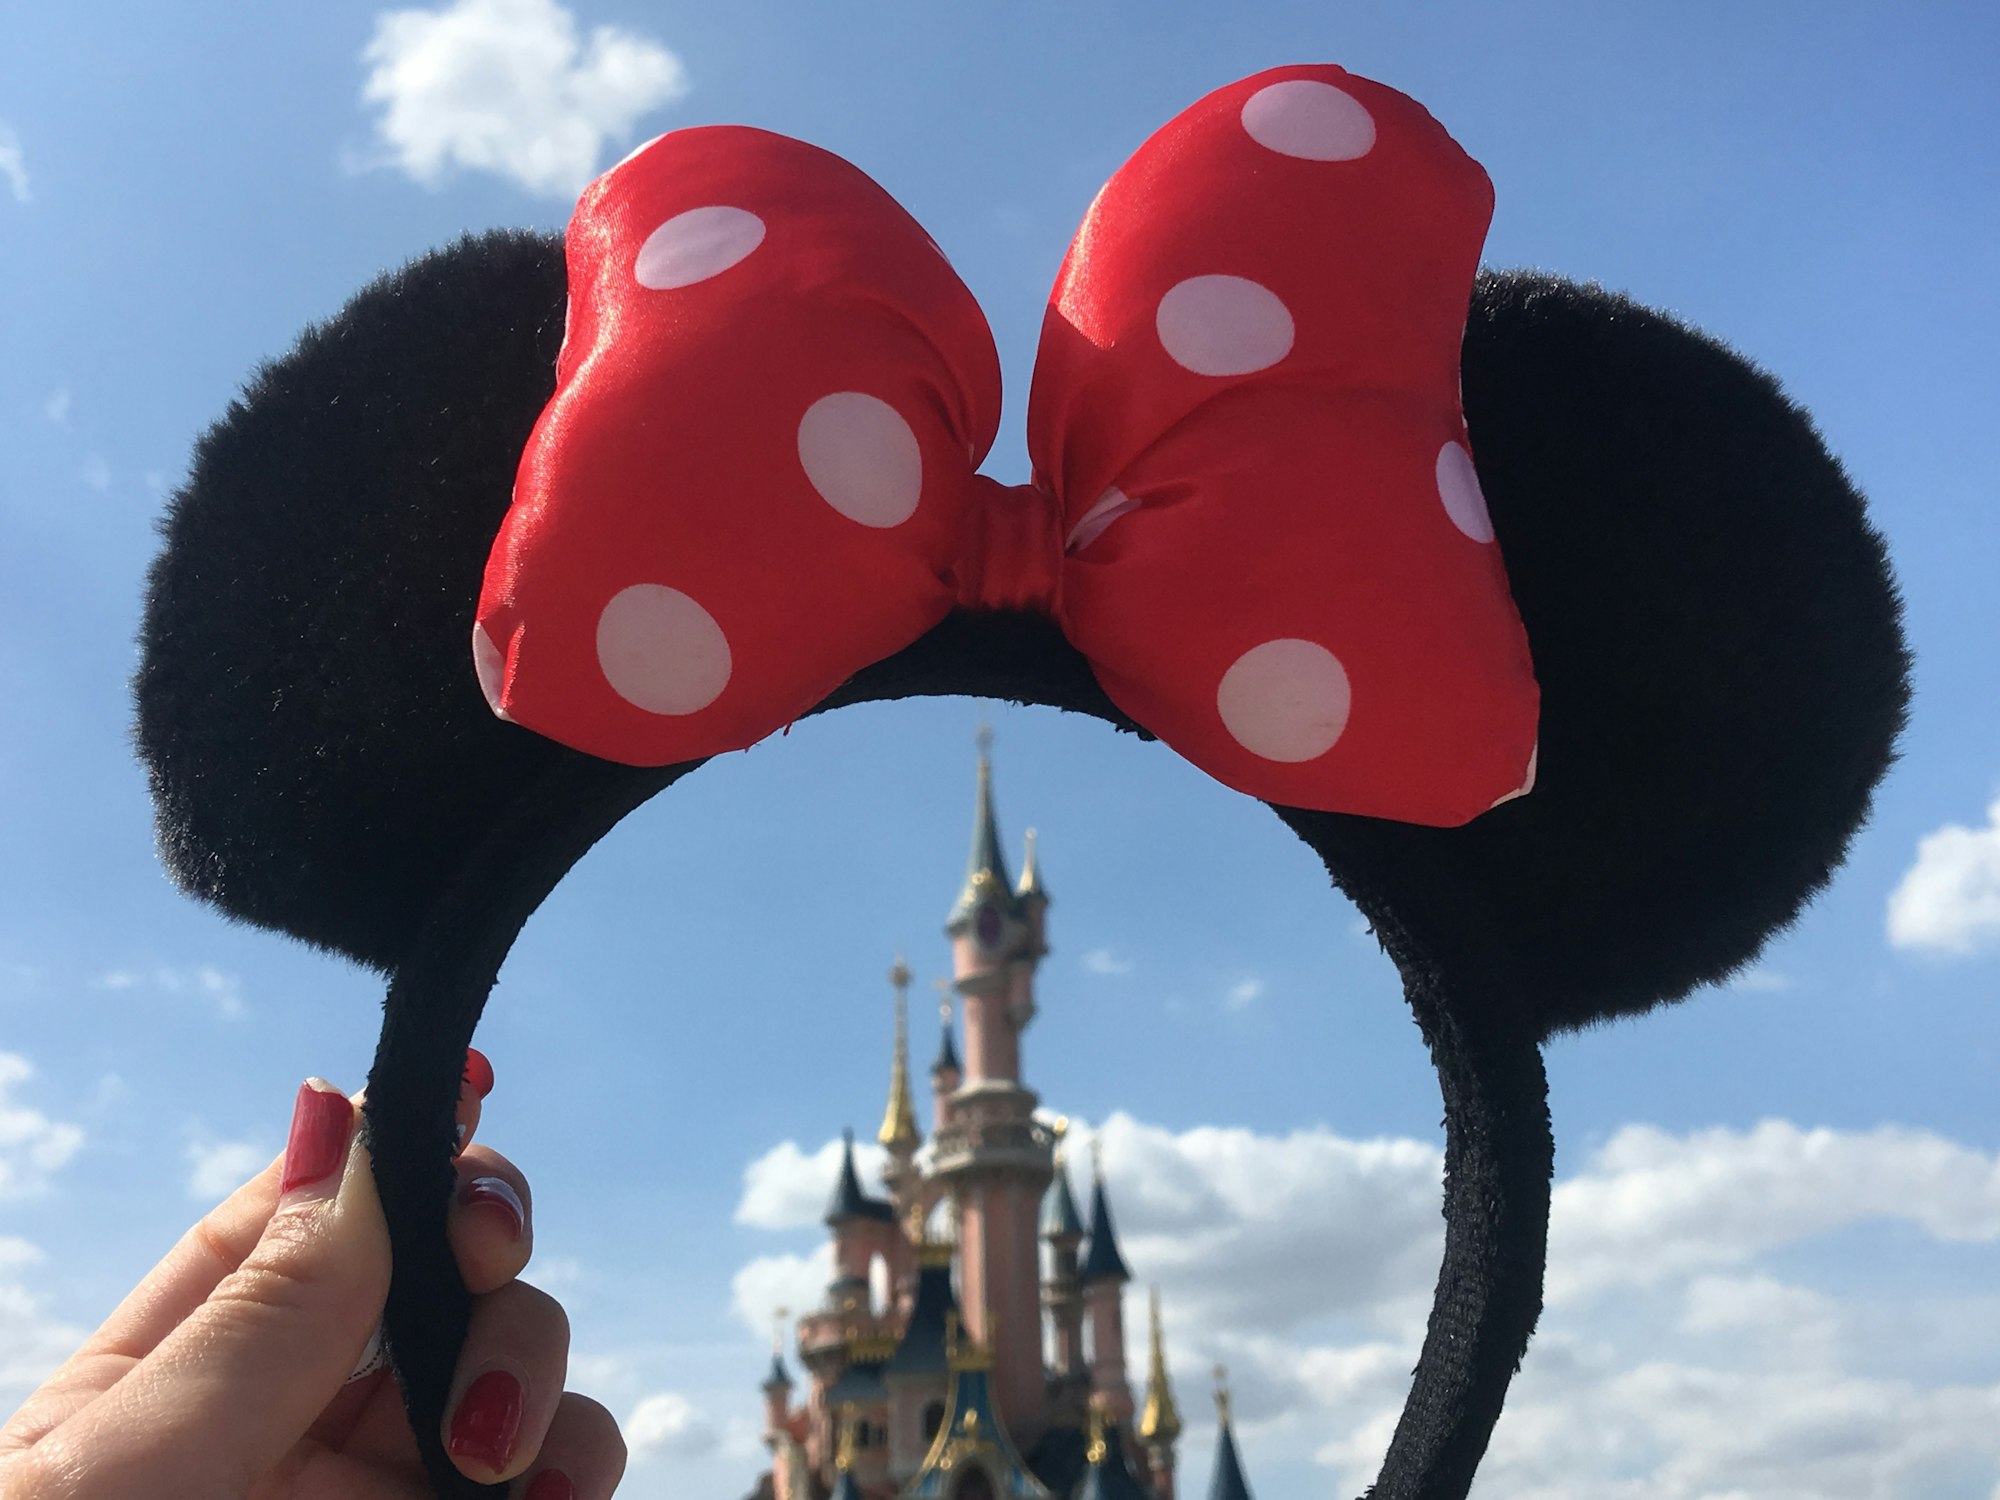 A woman holds a pair of Minnie Mouse ears in front of the Disney castle